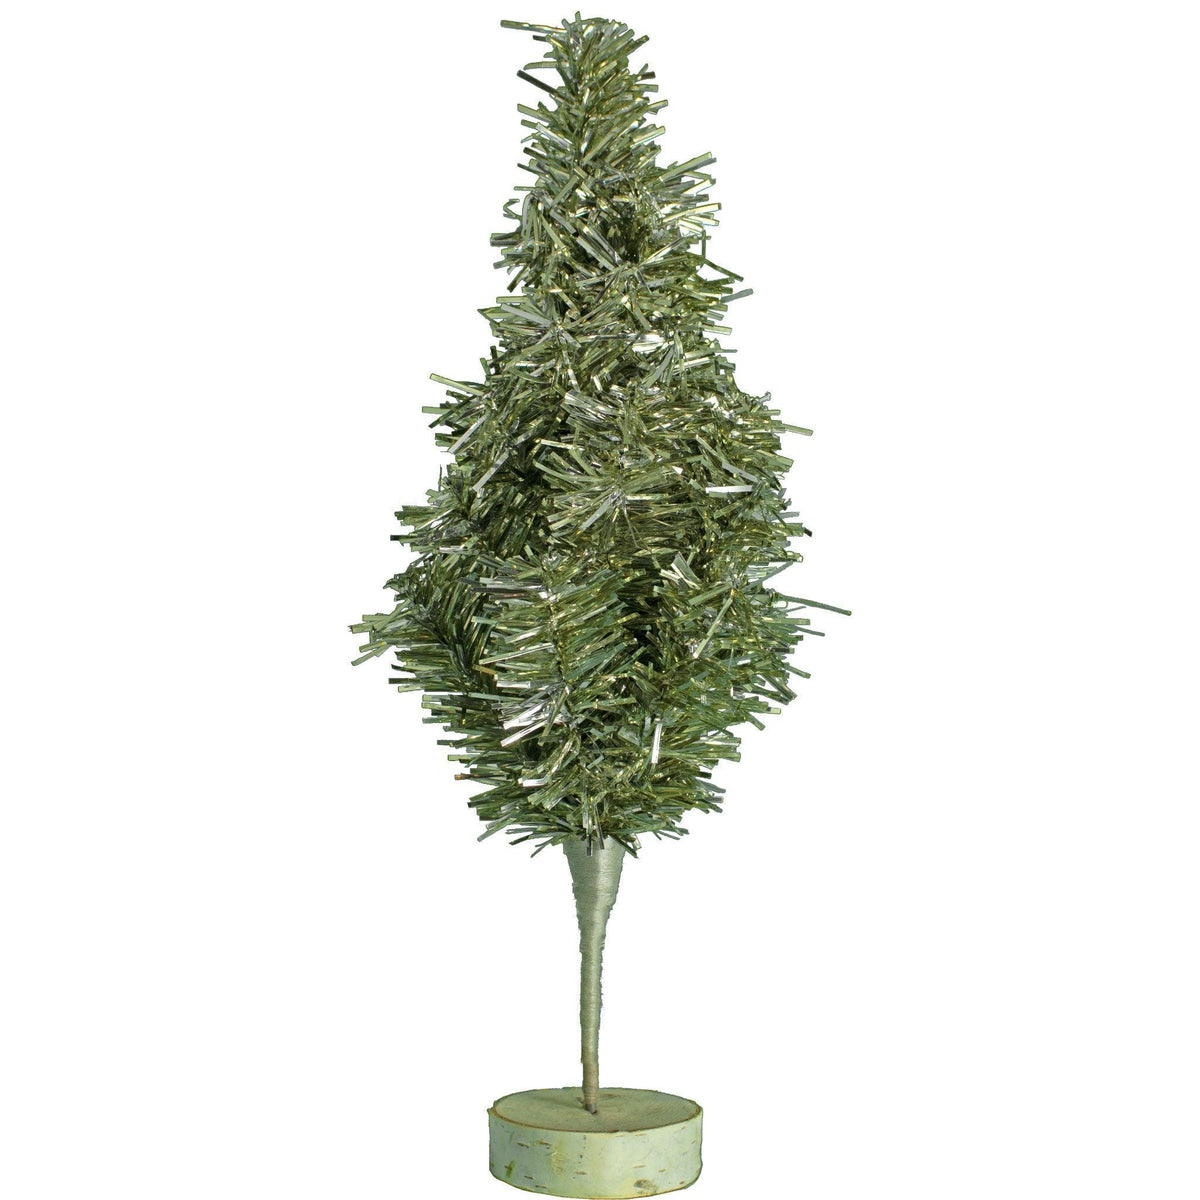 12in Mini Antique Silver Tinsel Christmas Trees have folding branches that pull down and bend in any direction. On sale at leedisplay.com.